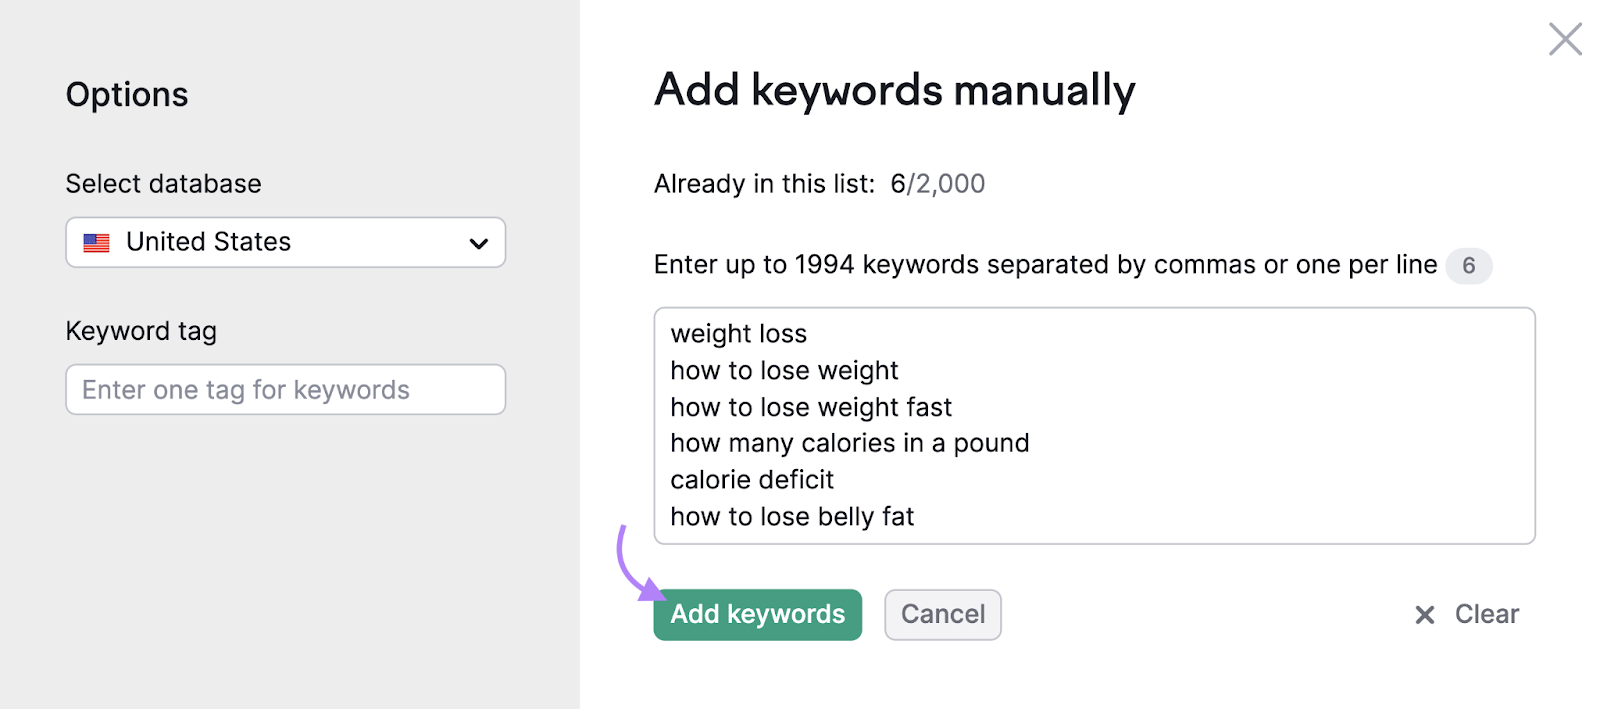 related keywords specified  arsenic  however  to suffer  value   accelerated  and calorie shortage  added to keyword manager